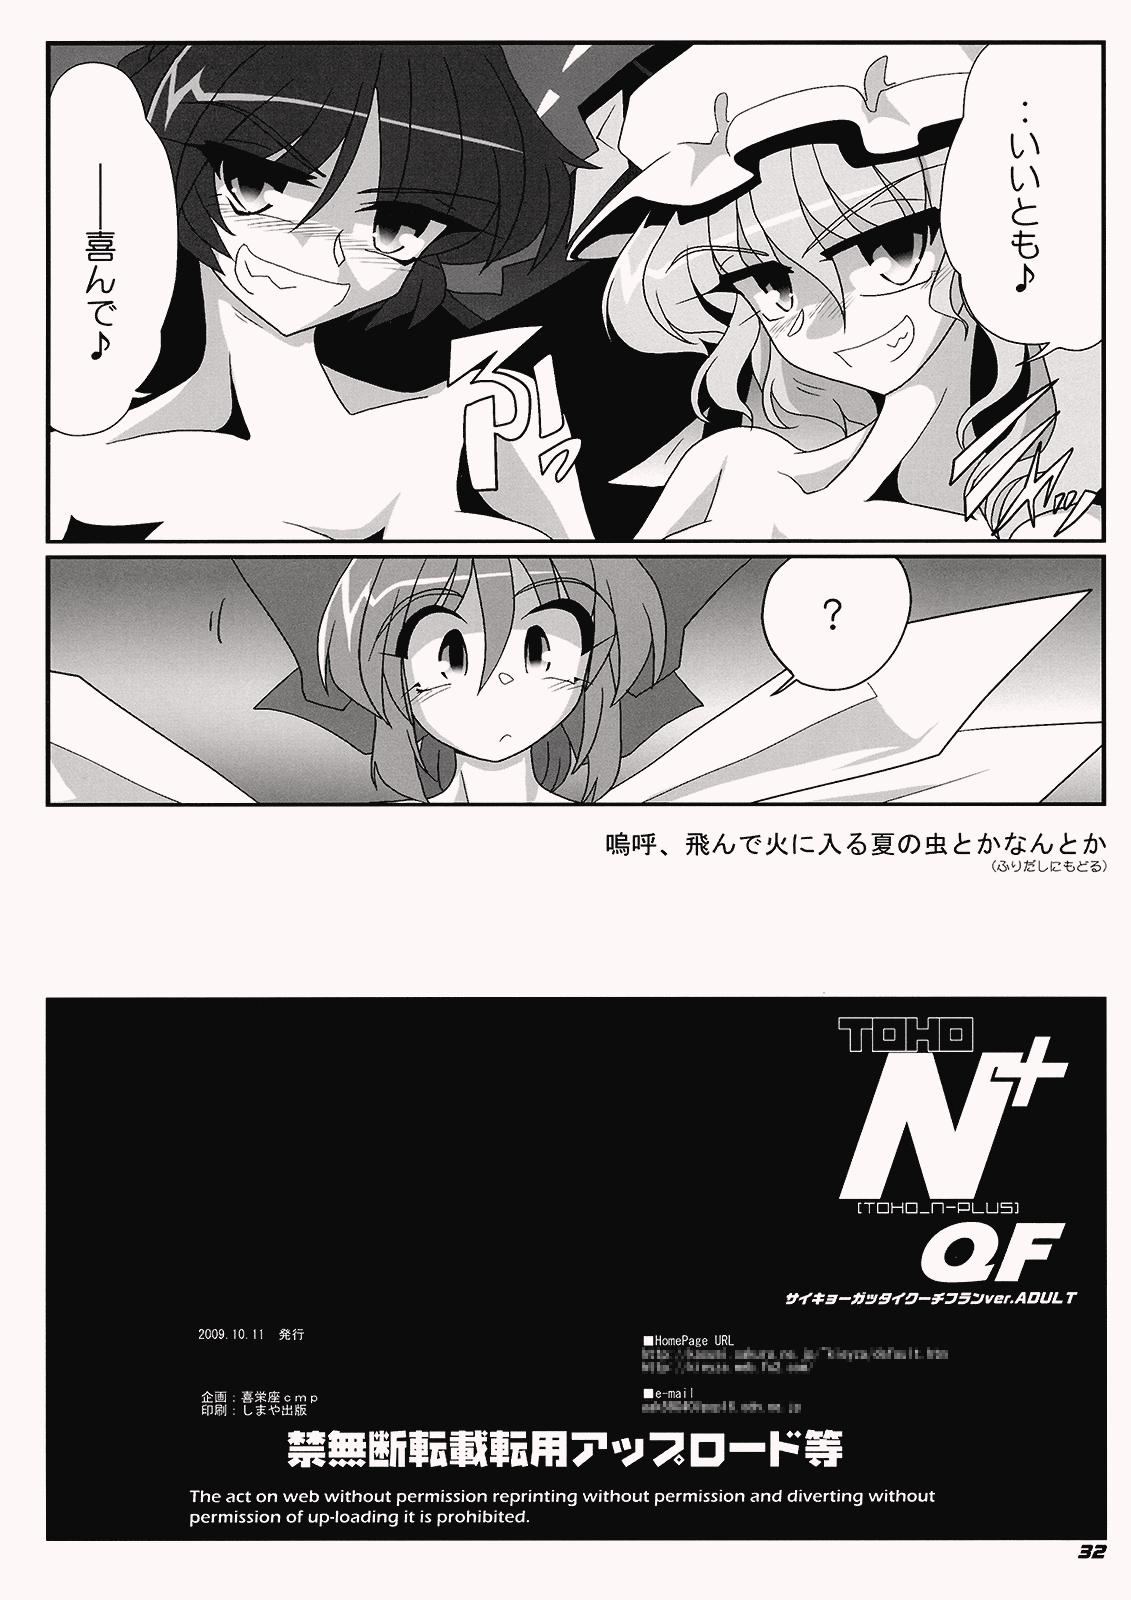 Small Tits Porn TOHO N+ QF - Touhou project Orgasms - Page 33